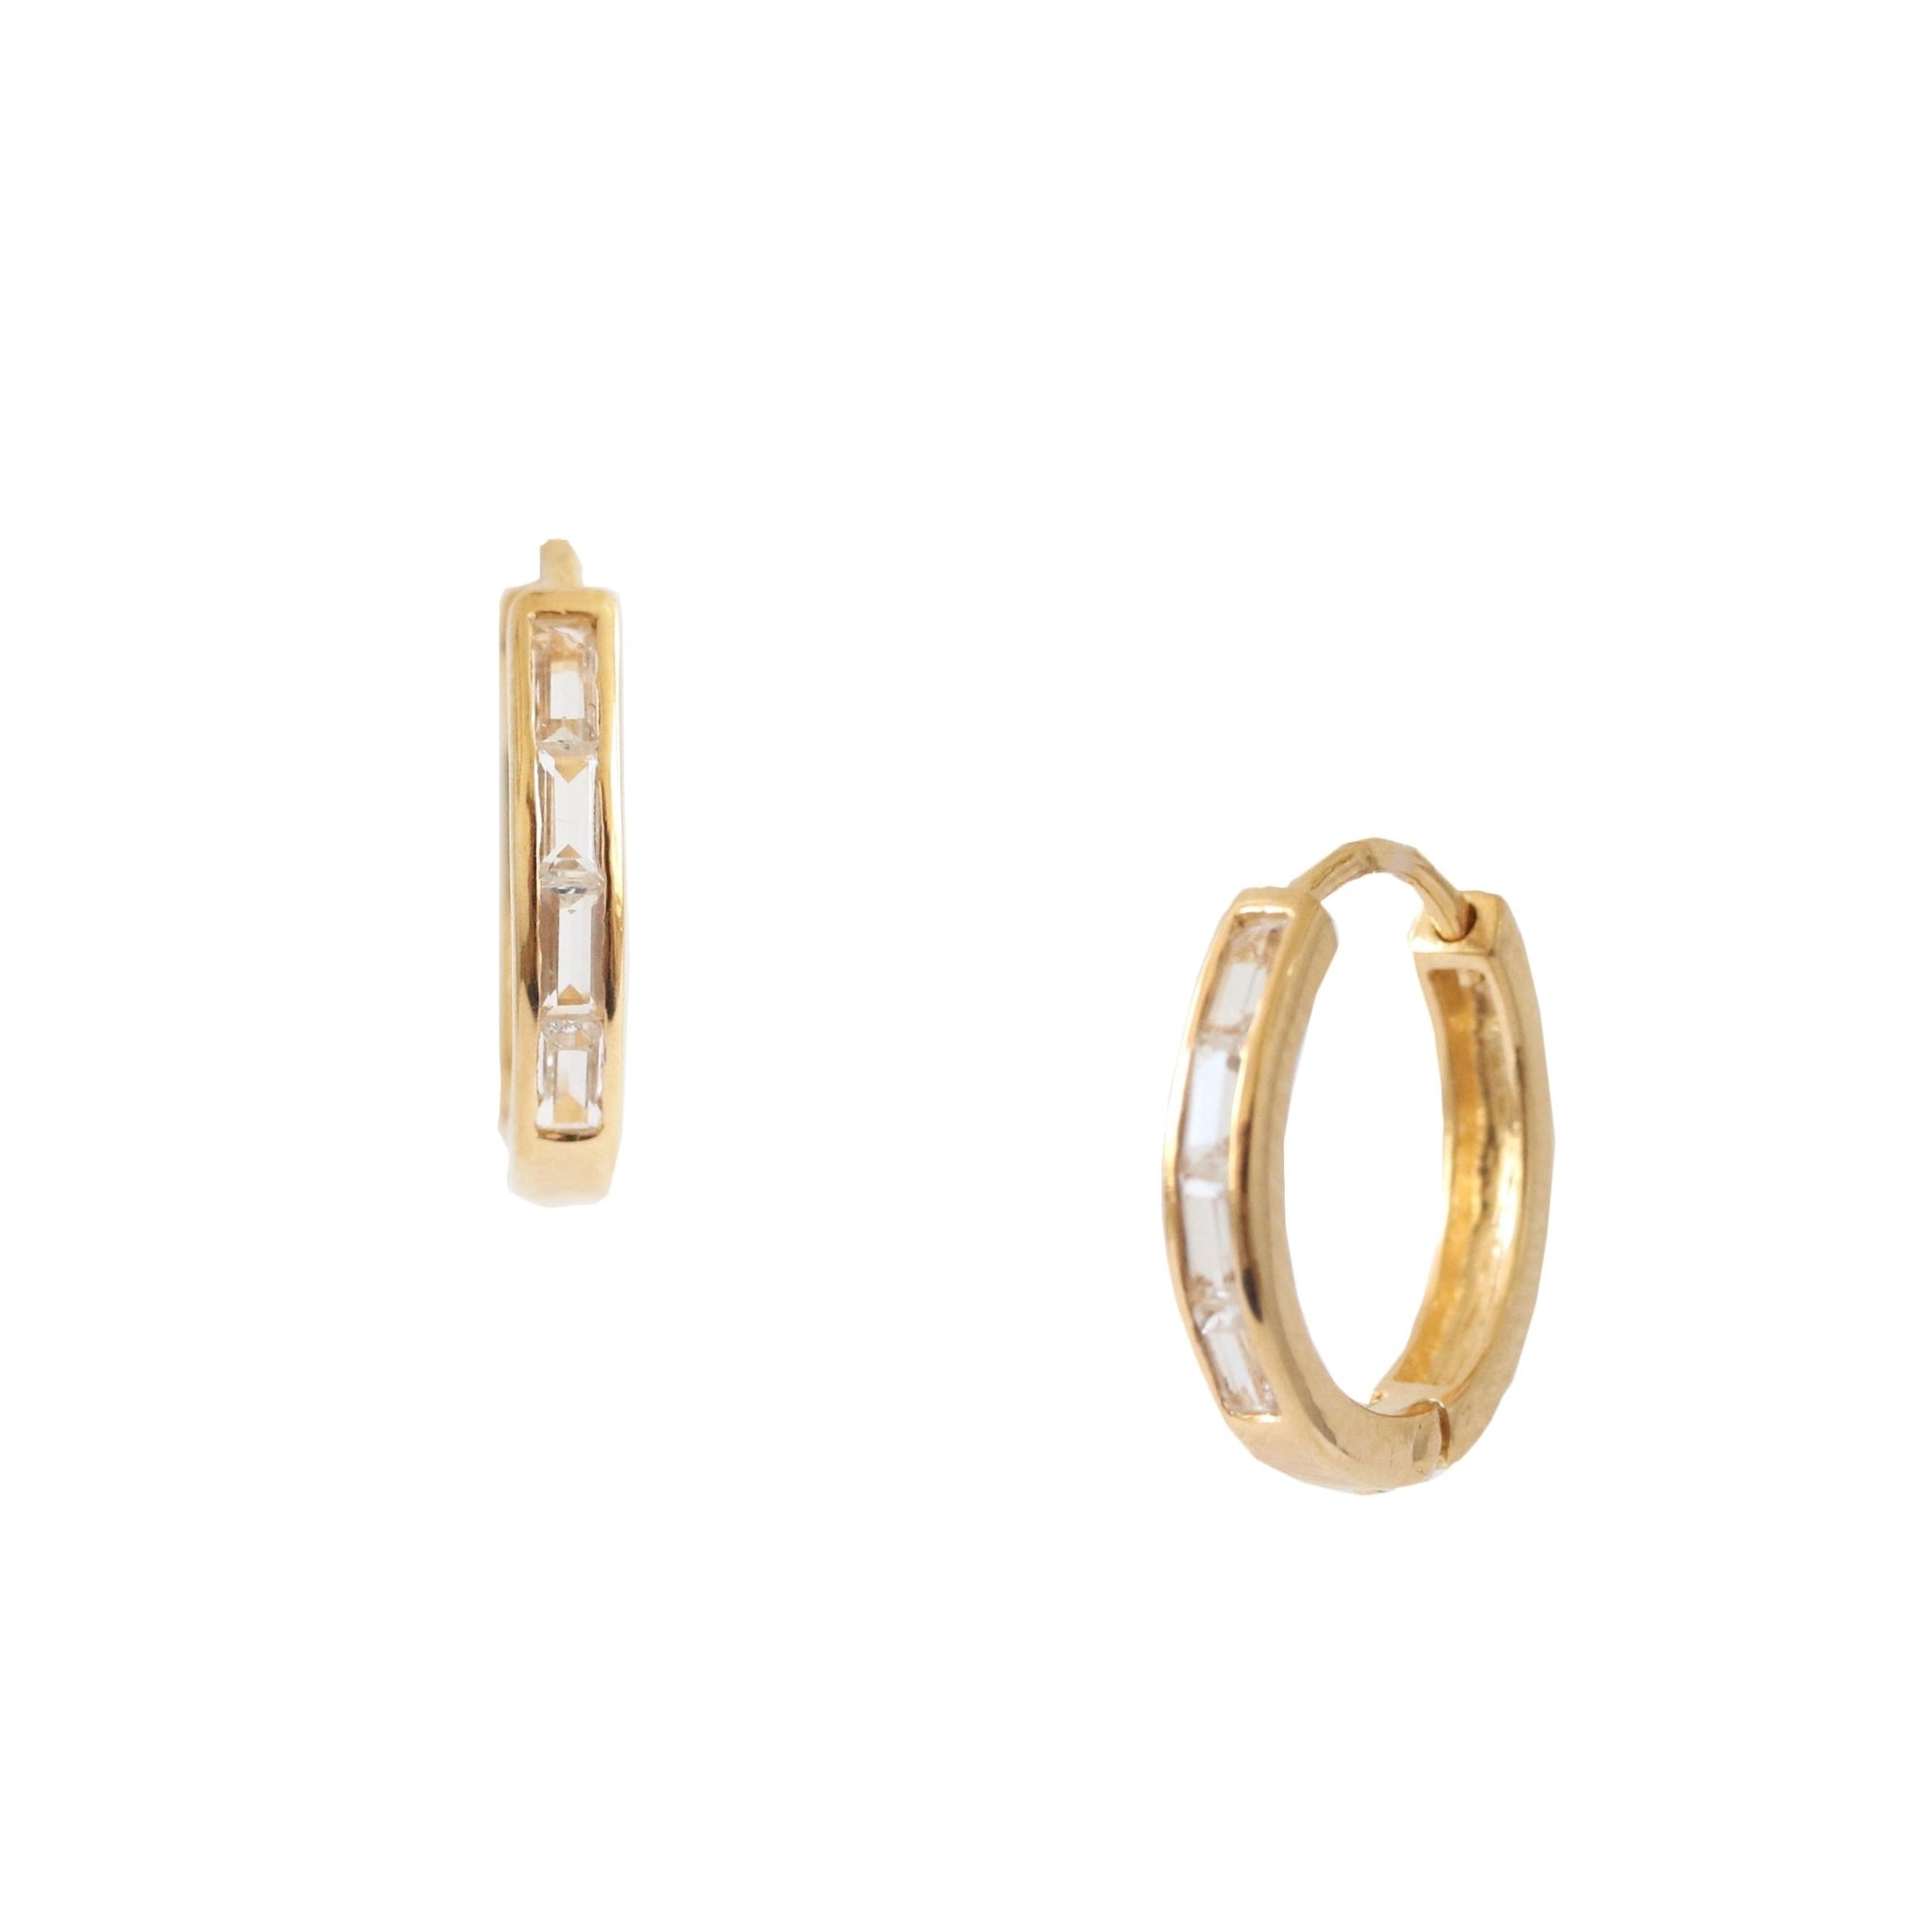 Loyal Channel Huggie Hoops - White Topaz & Gold - SO PRETTY CARA COTTER